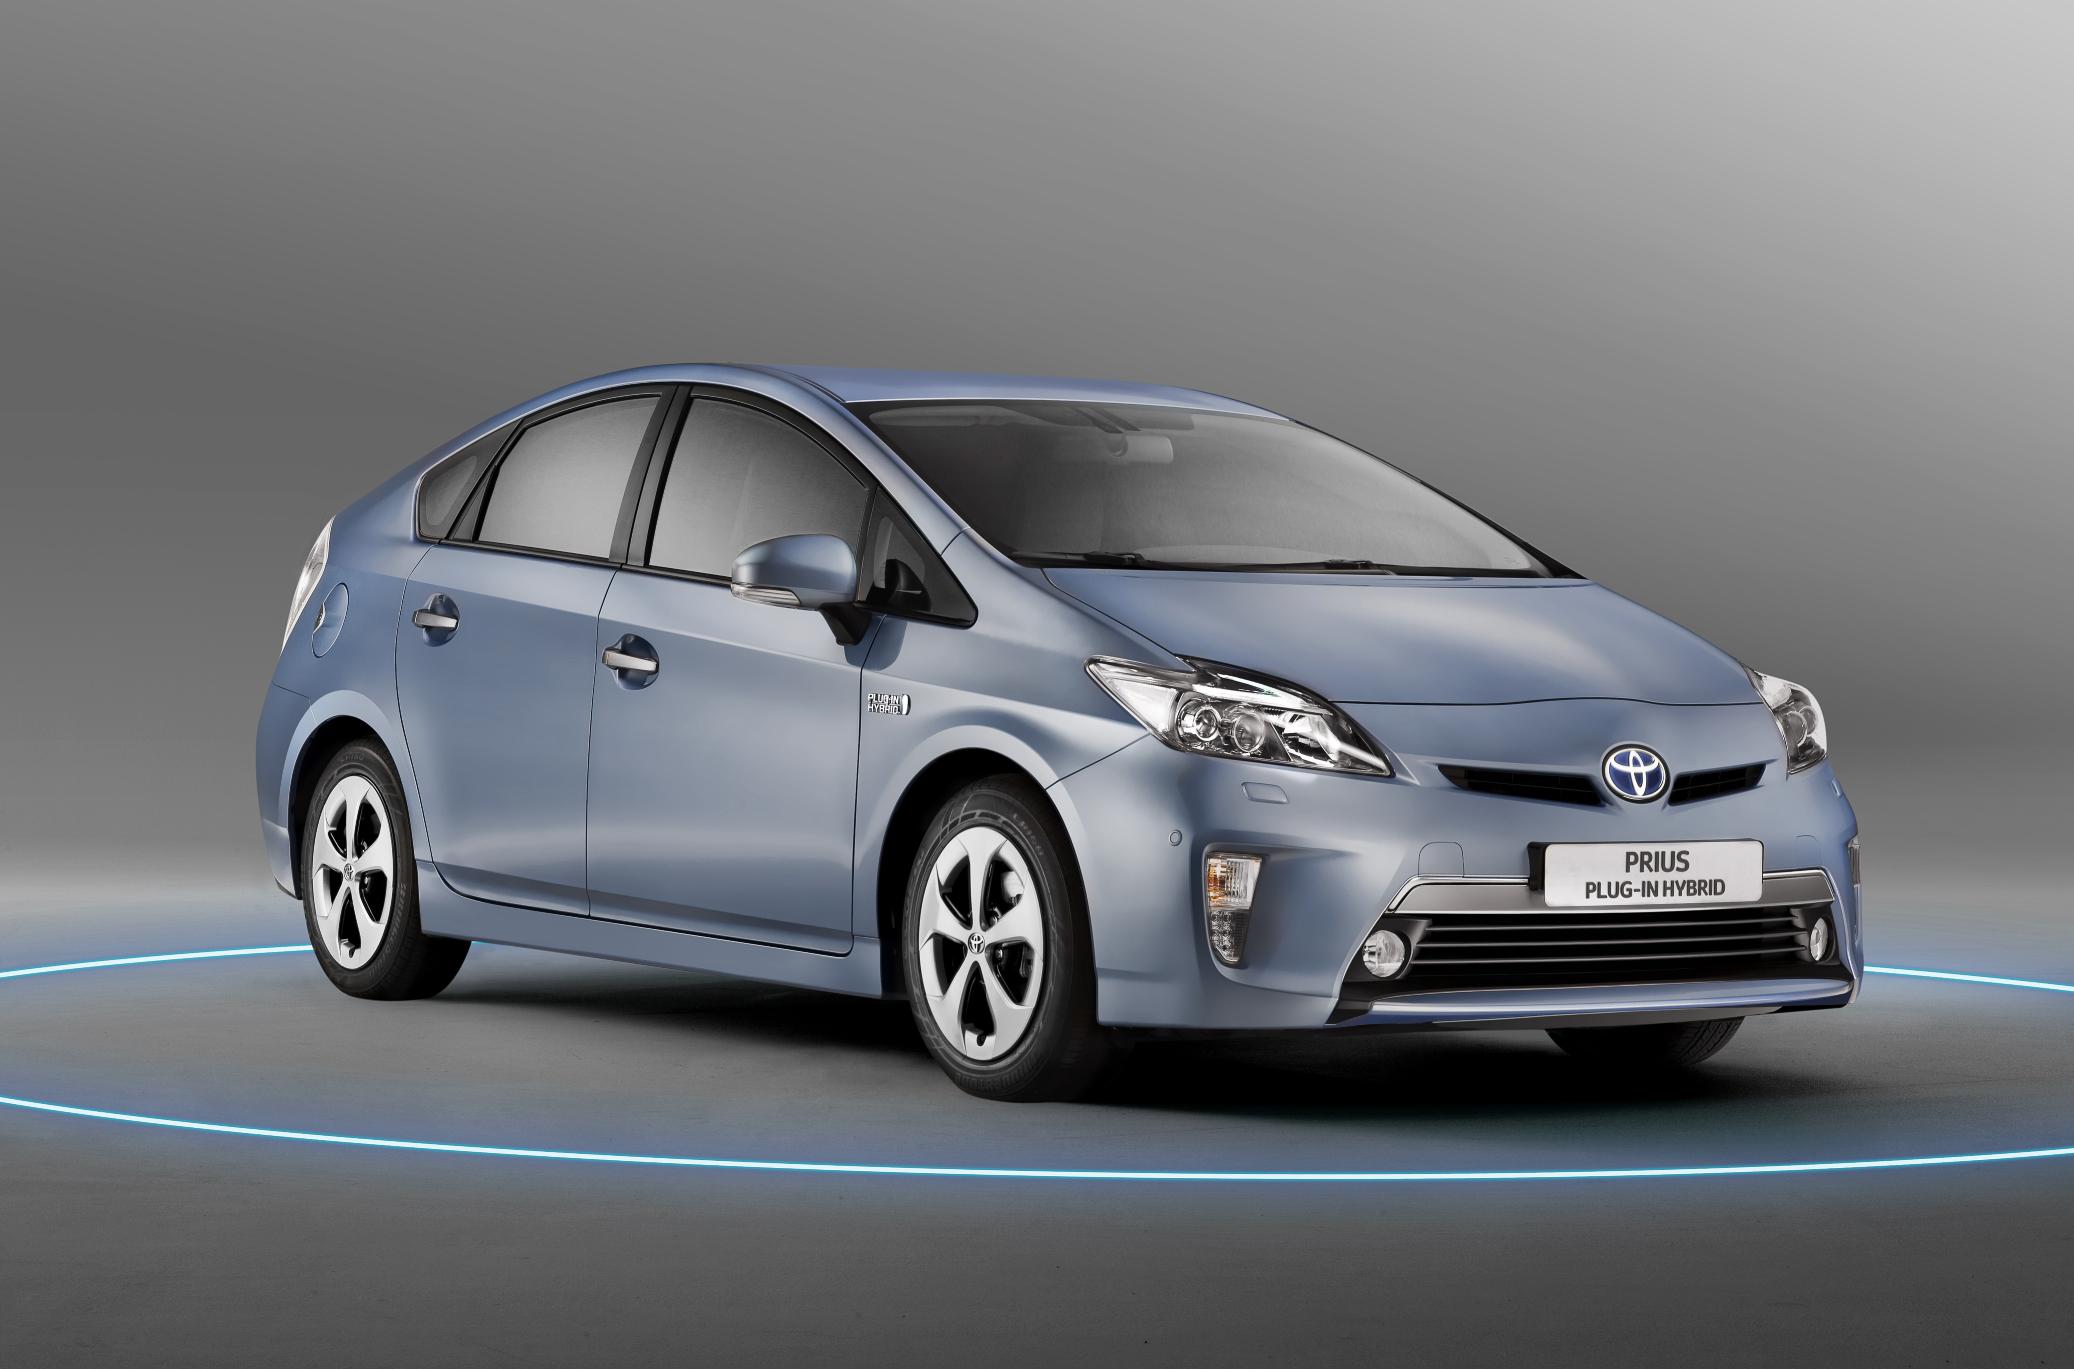 Toyota Prius Plug-In Hybrid (2012) - pictures & information